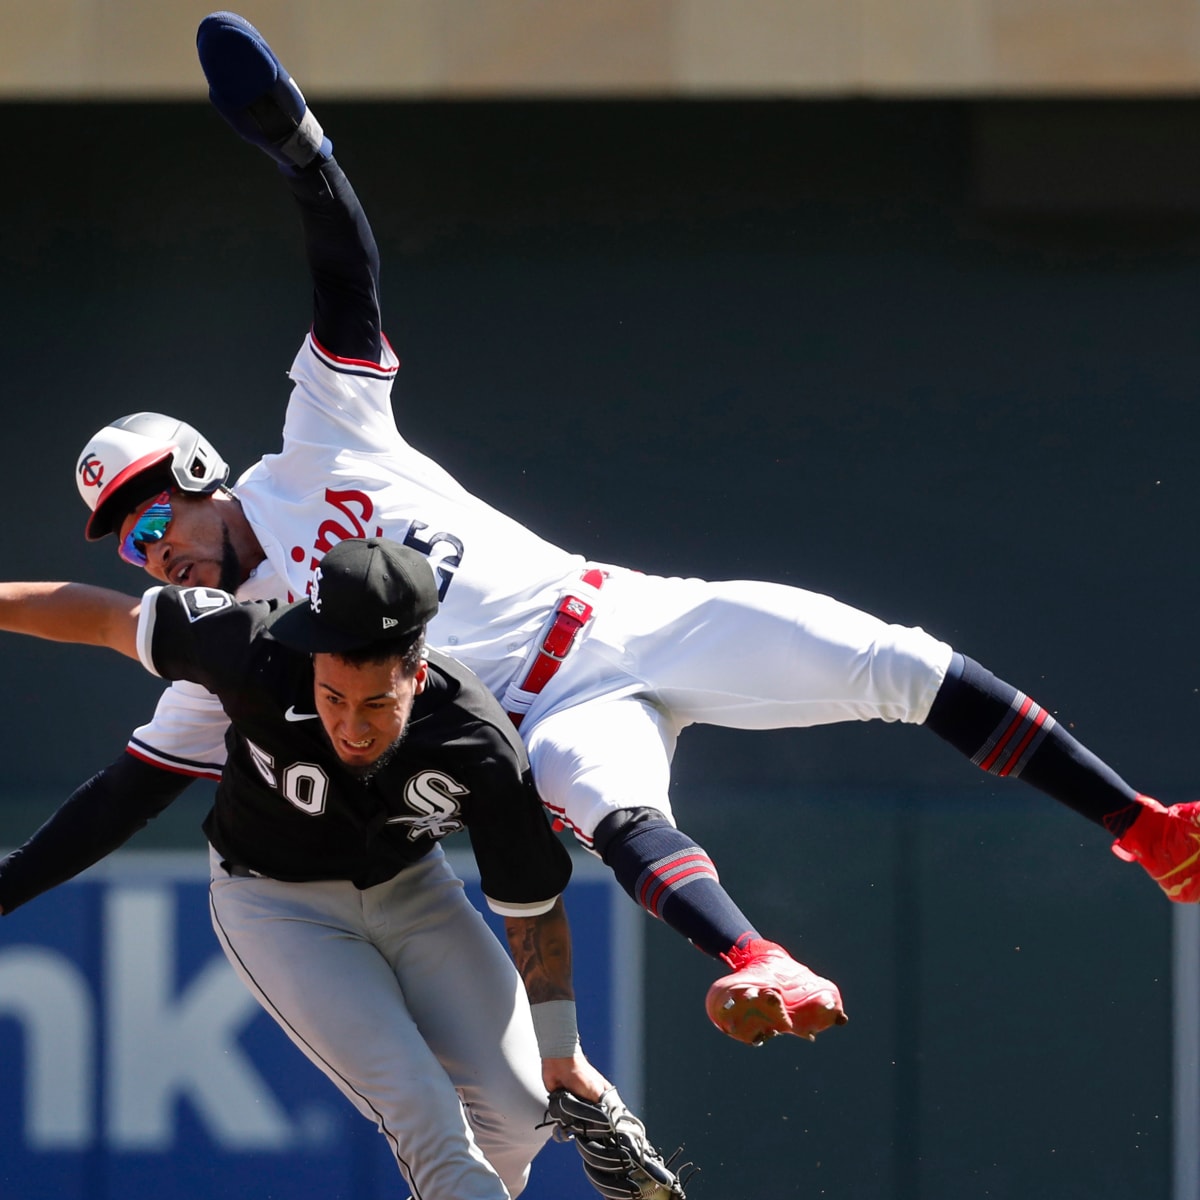 MLB Streaks & Trends: We're in the Midst of a Classic Byron Buxton